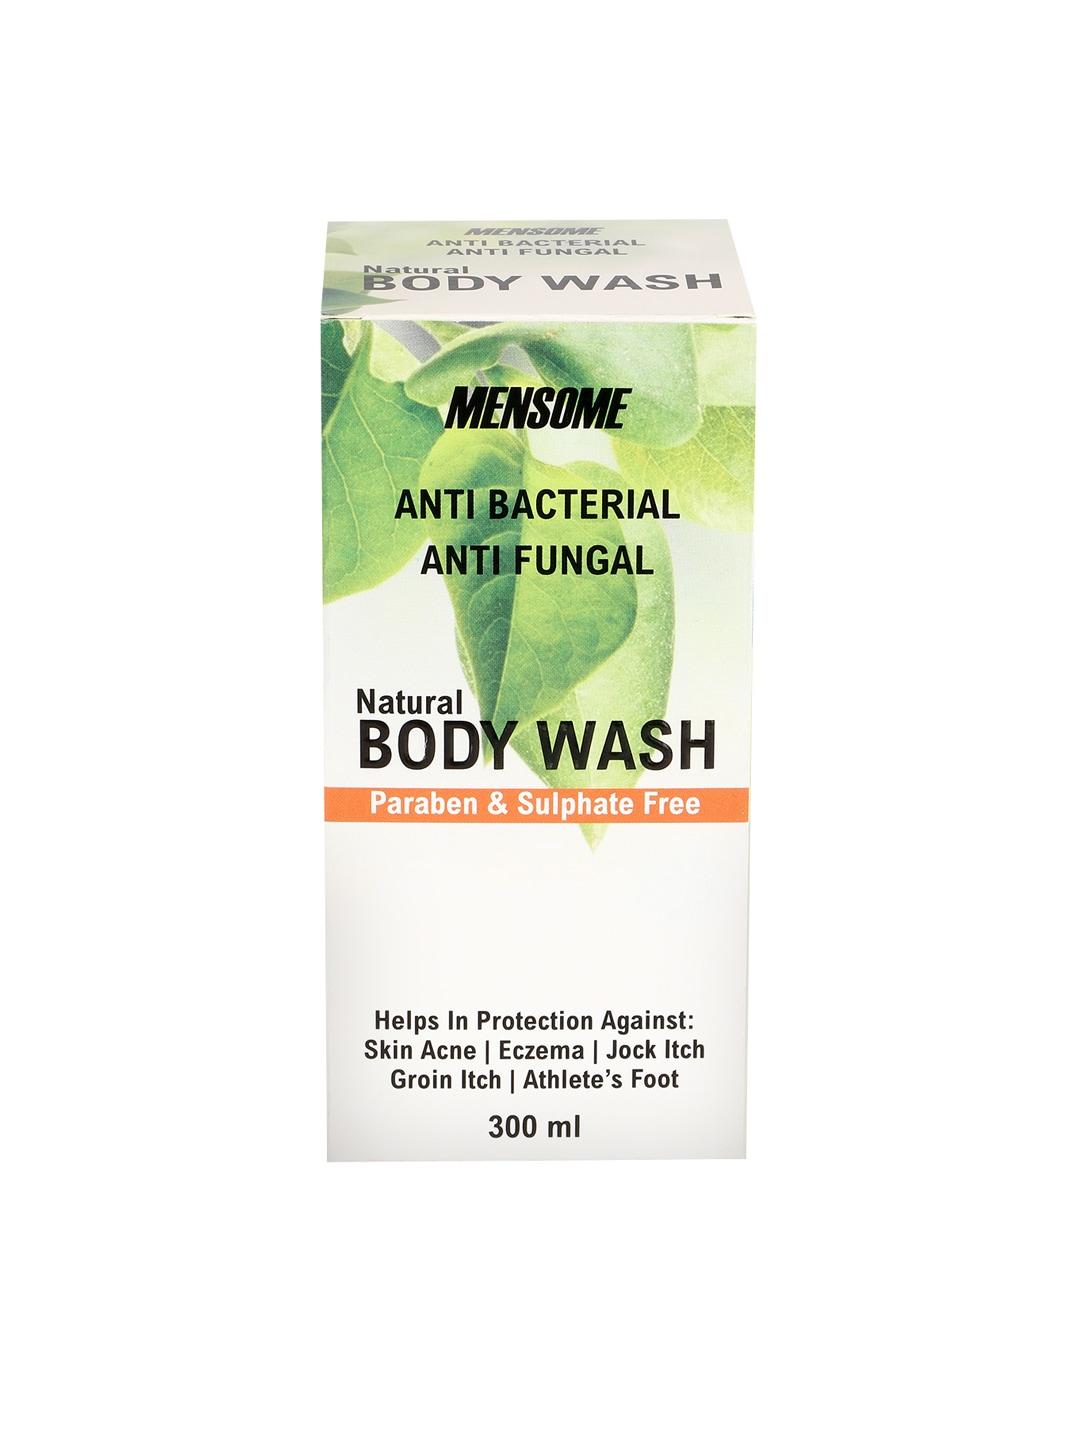 MENSOME Unisex Anti Bacterial and Anti Fungal Body wash, 300 ml